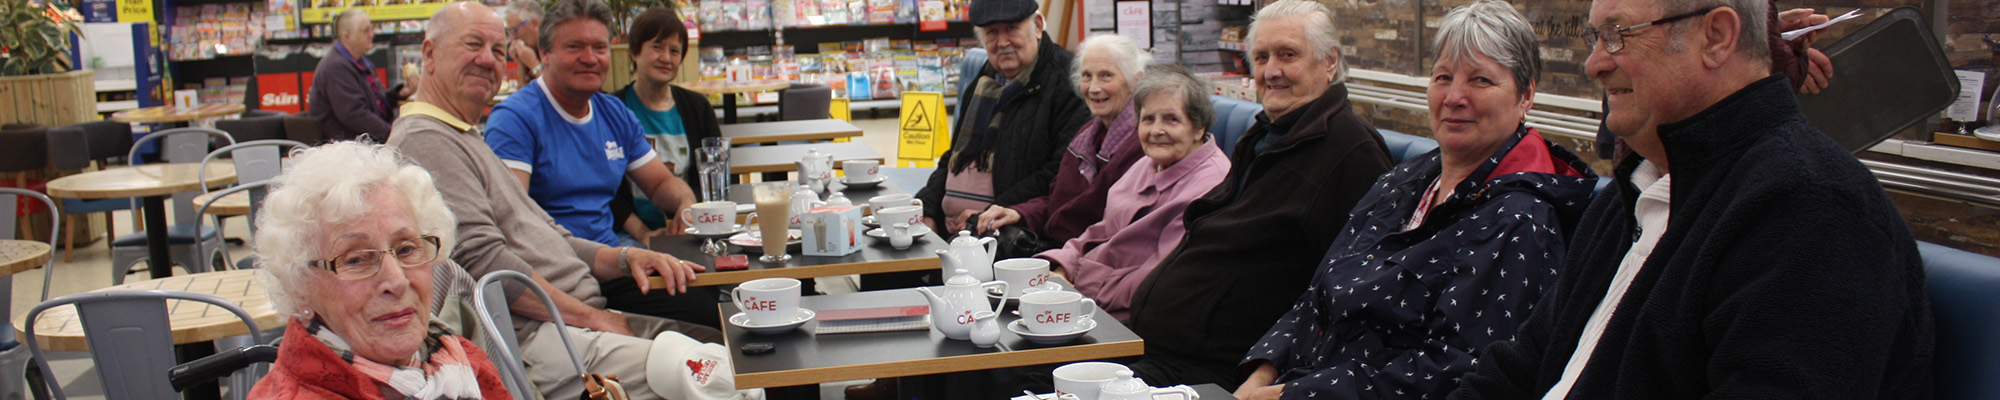 A group of Good Neighbours having a cuppa in a cafe